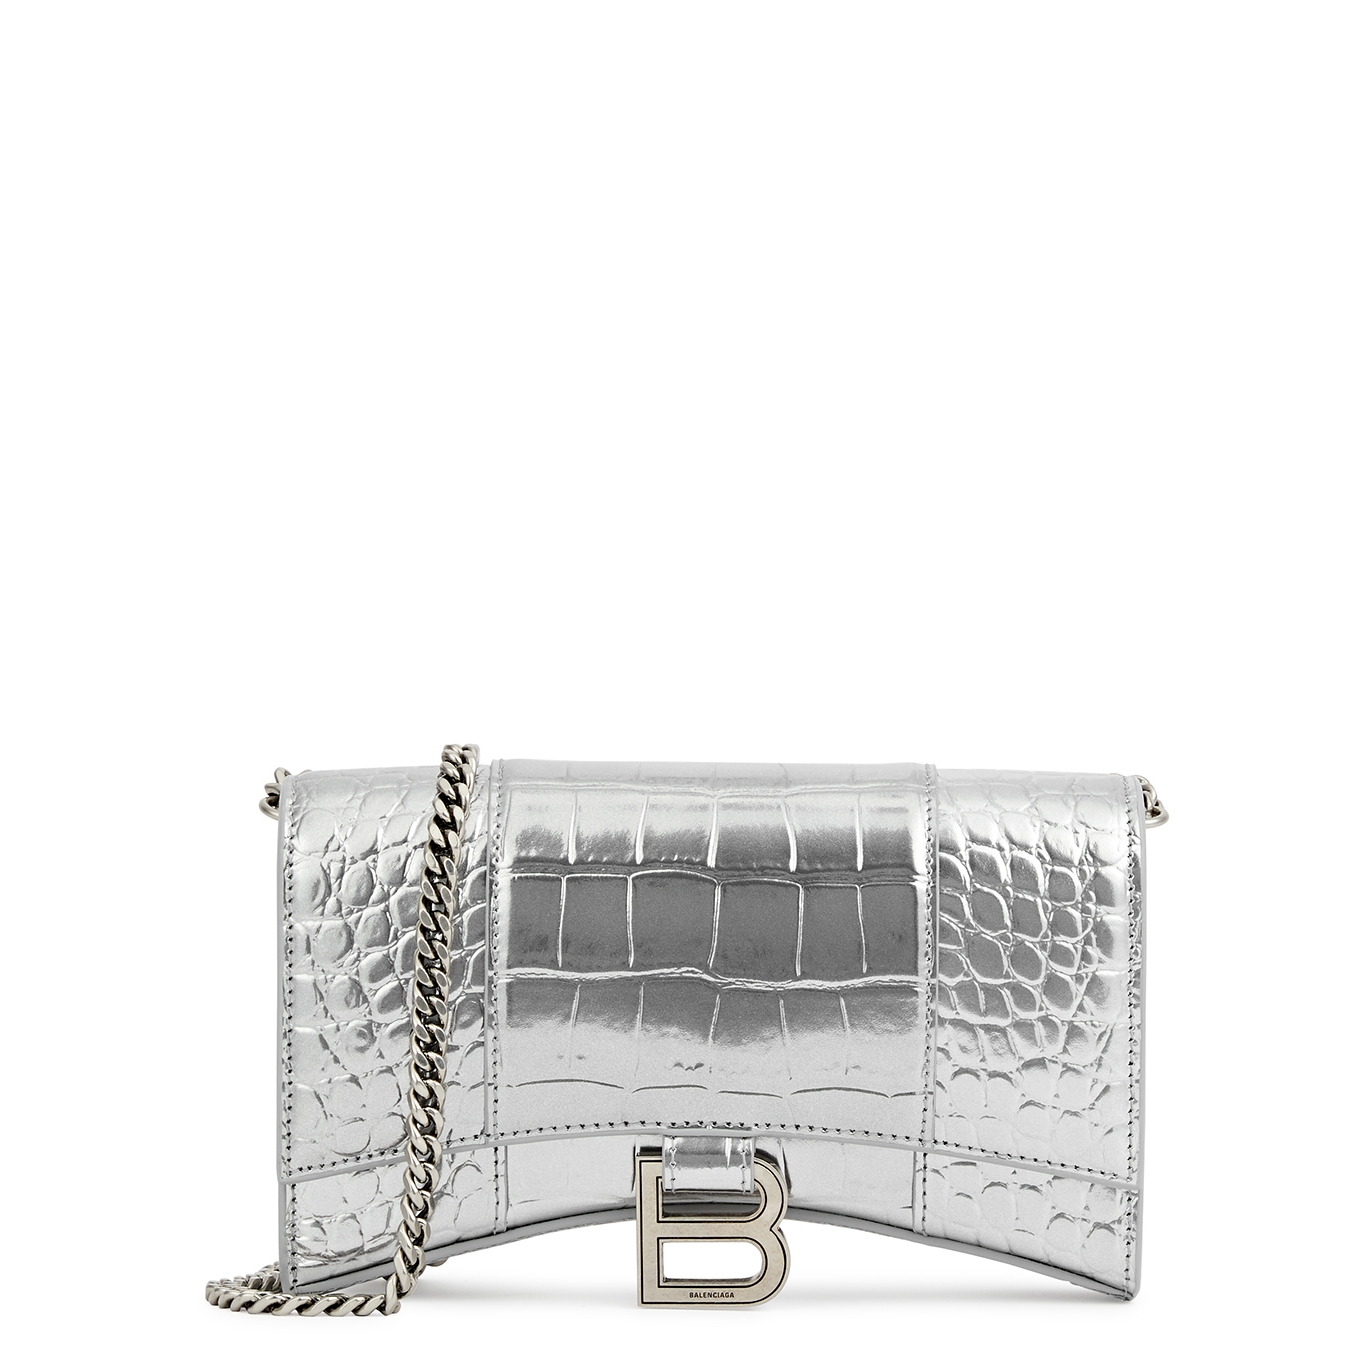 Hourglass Croc Effect Leather Wallet On Chain in Black - Balenciaga